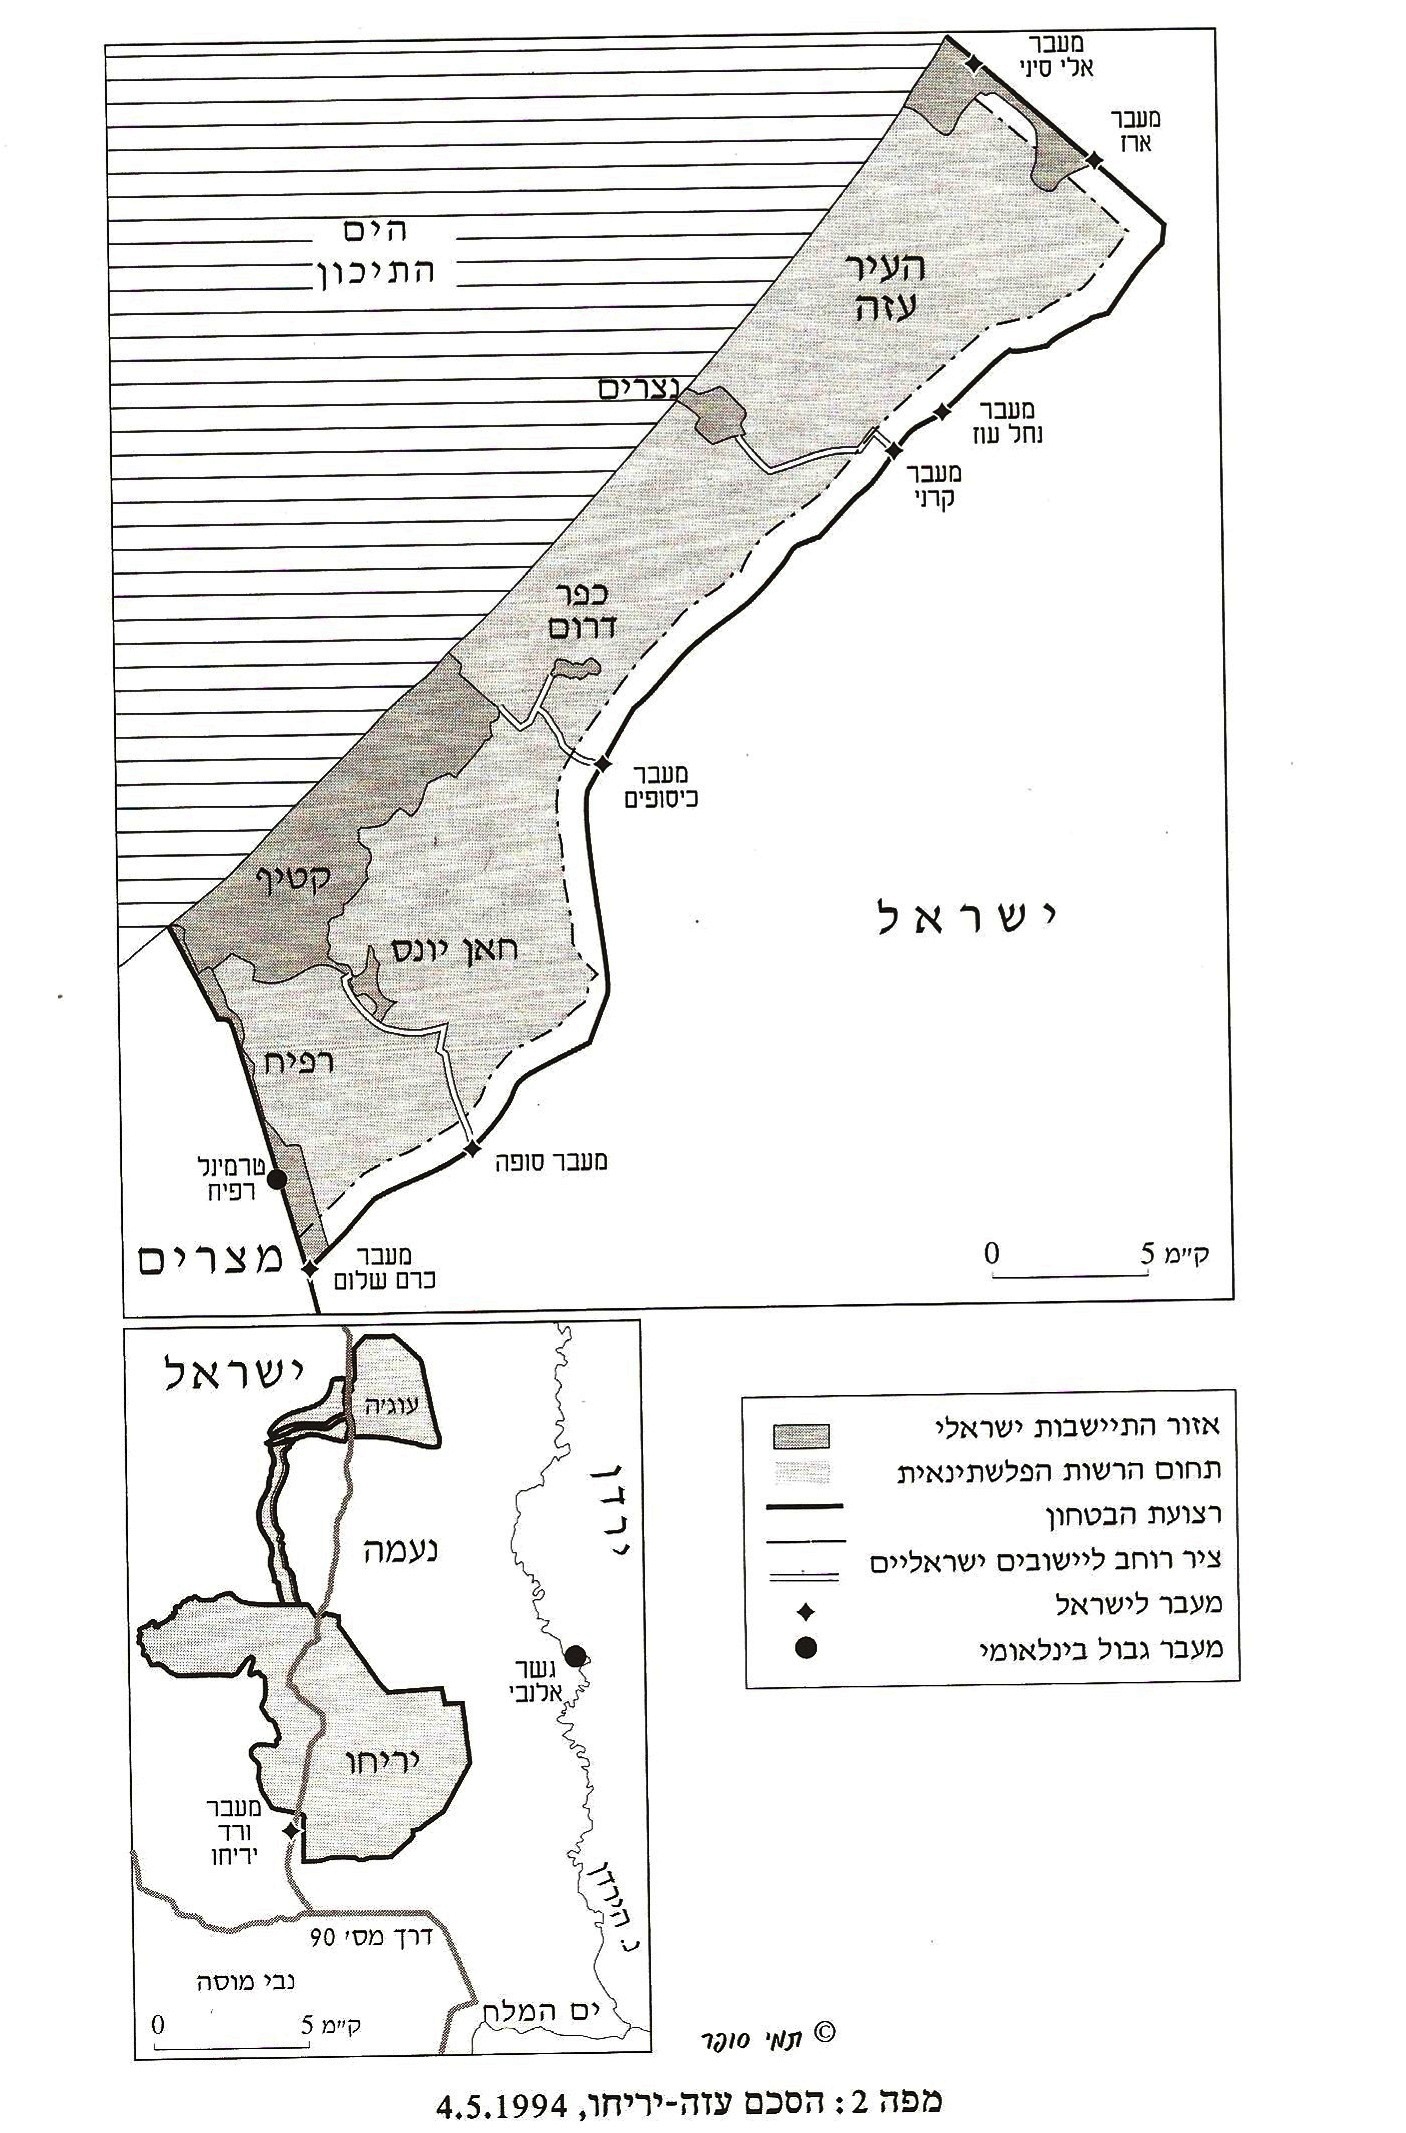 Cairo Agreement on Gaza and Jericho - Map 1 - Hebrew (1994)